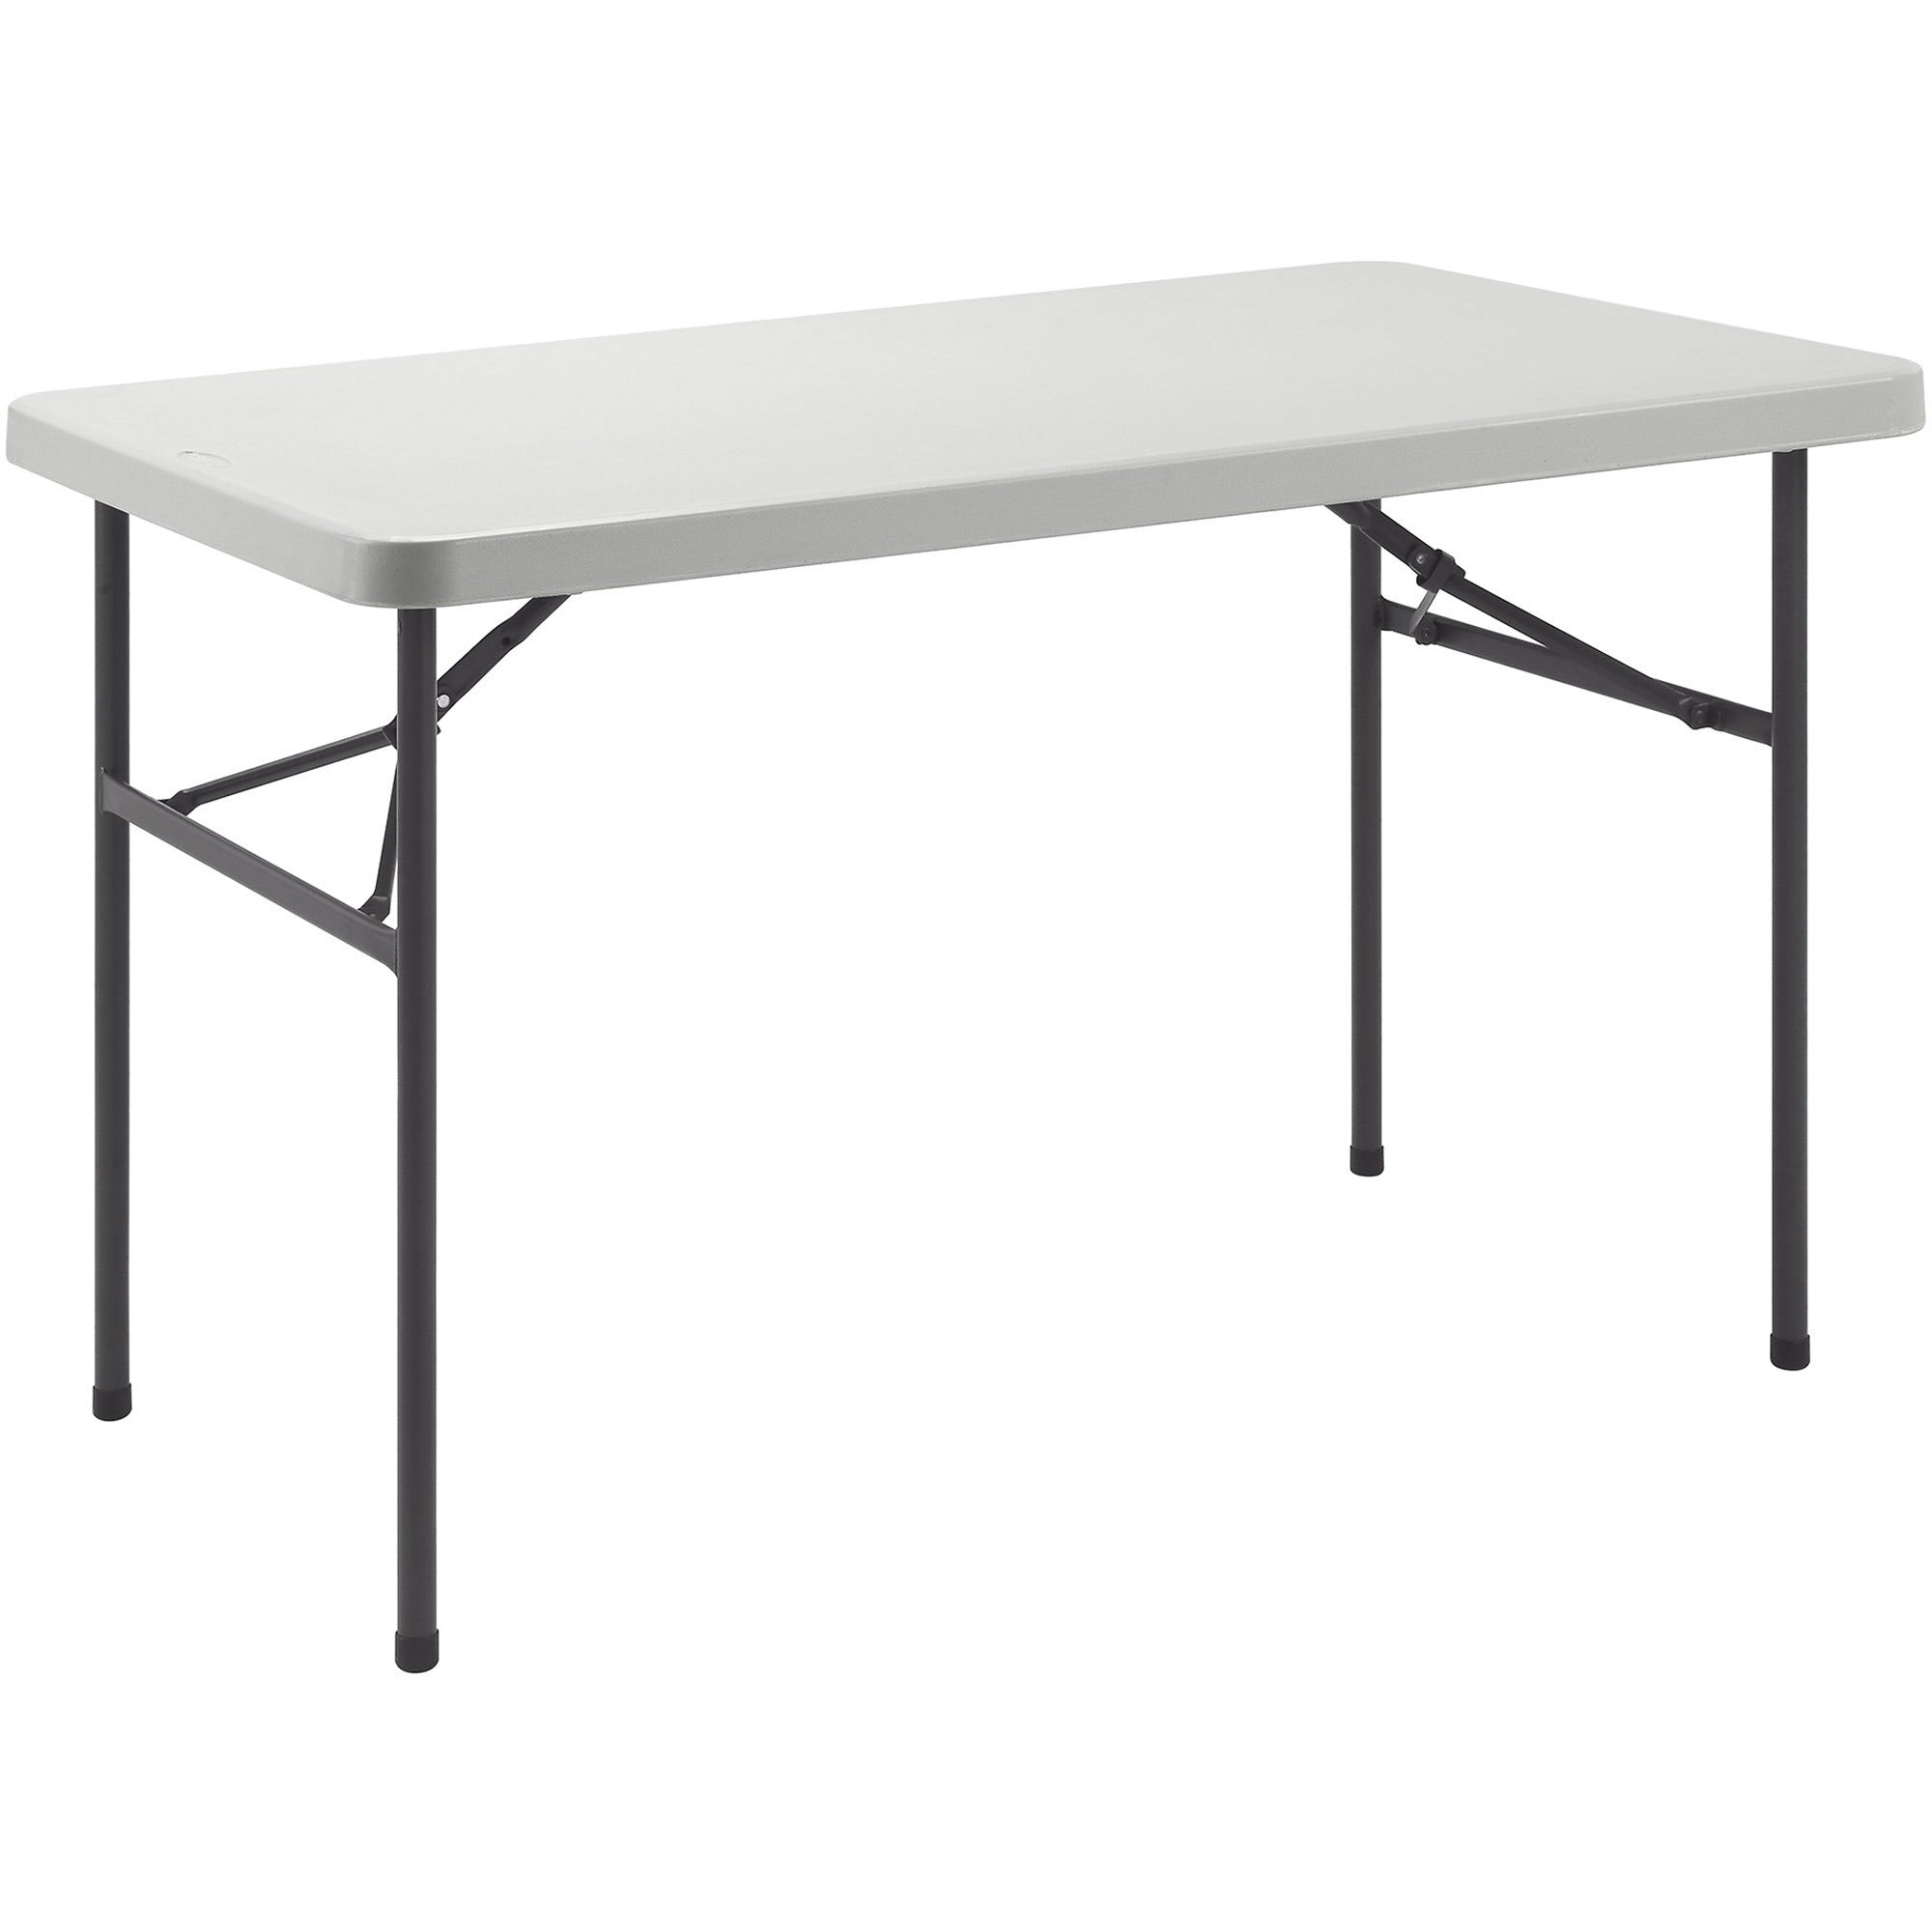 lorell-ultra-lite-banquet-table-for-table-toplight-gray-rectangle-top-dark-gray-base-450-lb-capacity-x-48-table-top-width-x-30-table-top-depth-x-2-table-top-thickness-29-height-gray-1-each_llr66657 - 4